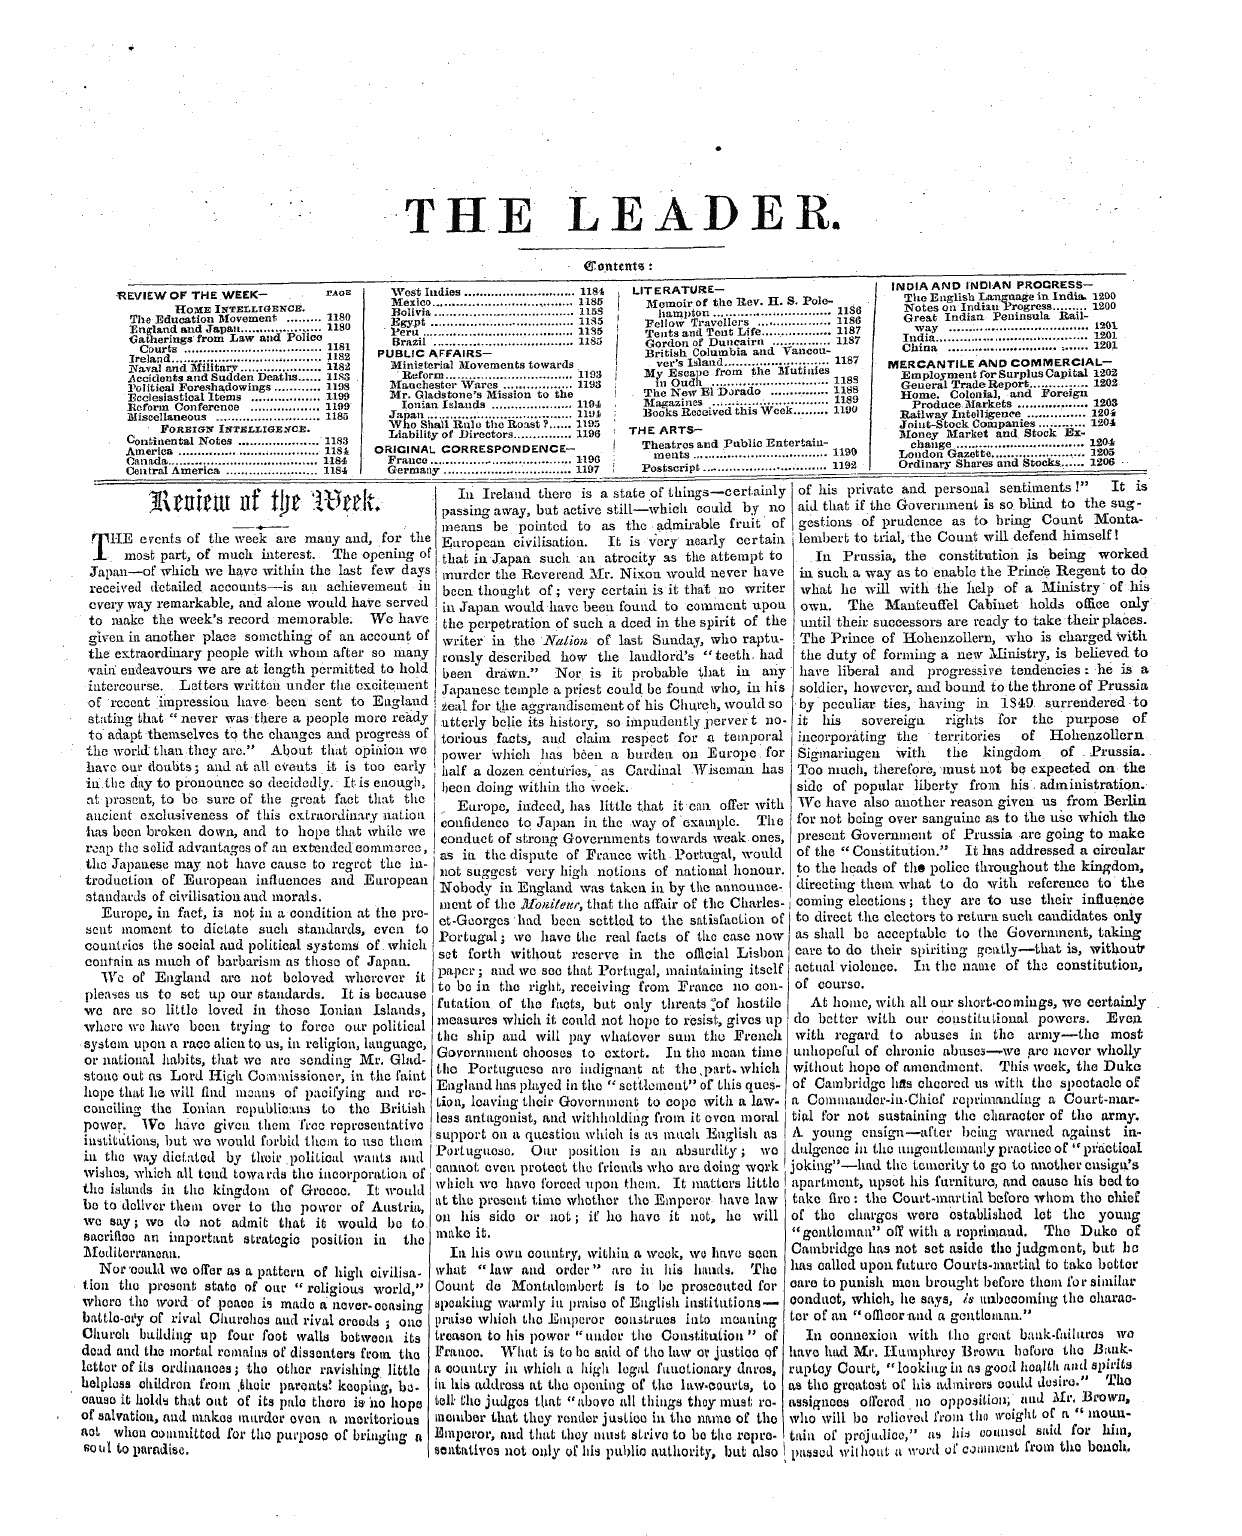 Leader (1850-1860): jS F Y, 1st edition - Contents: